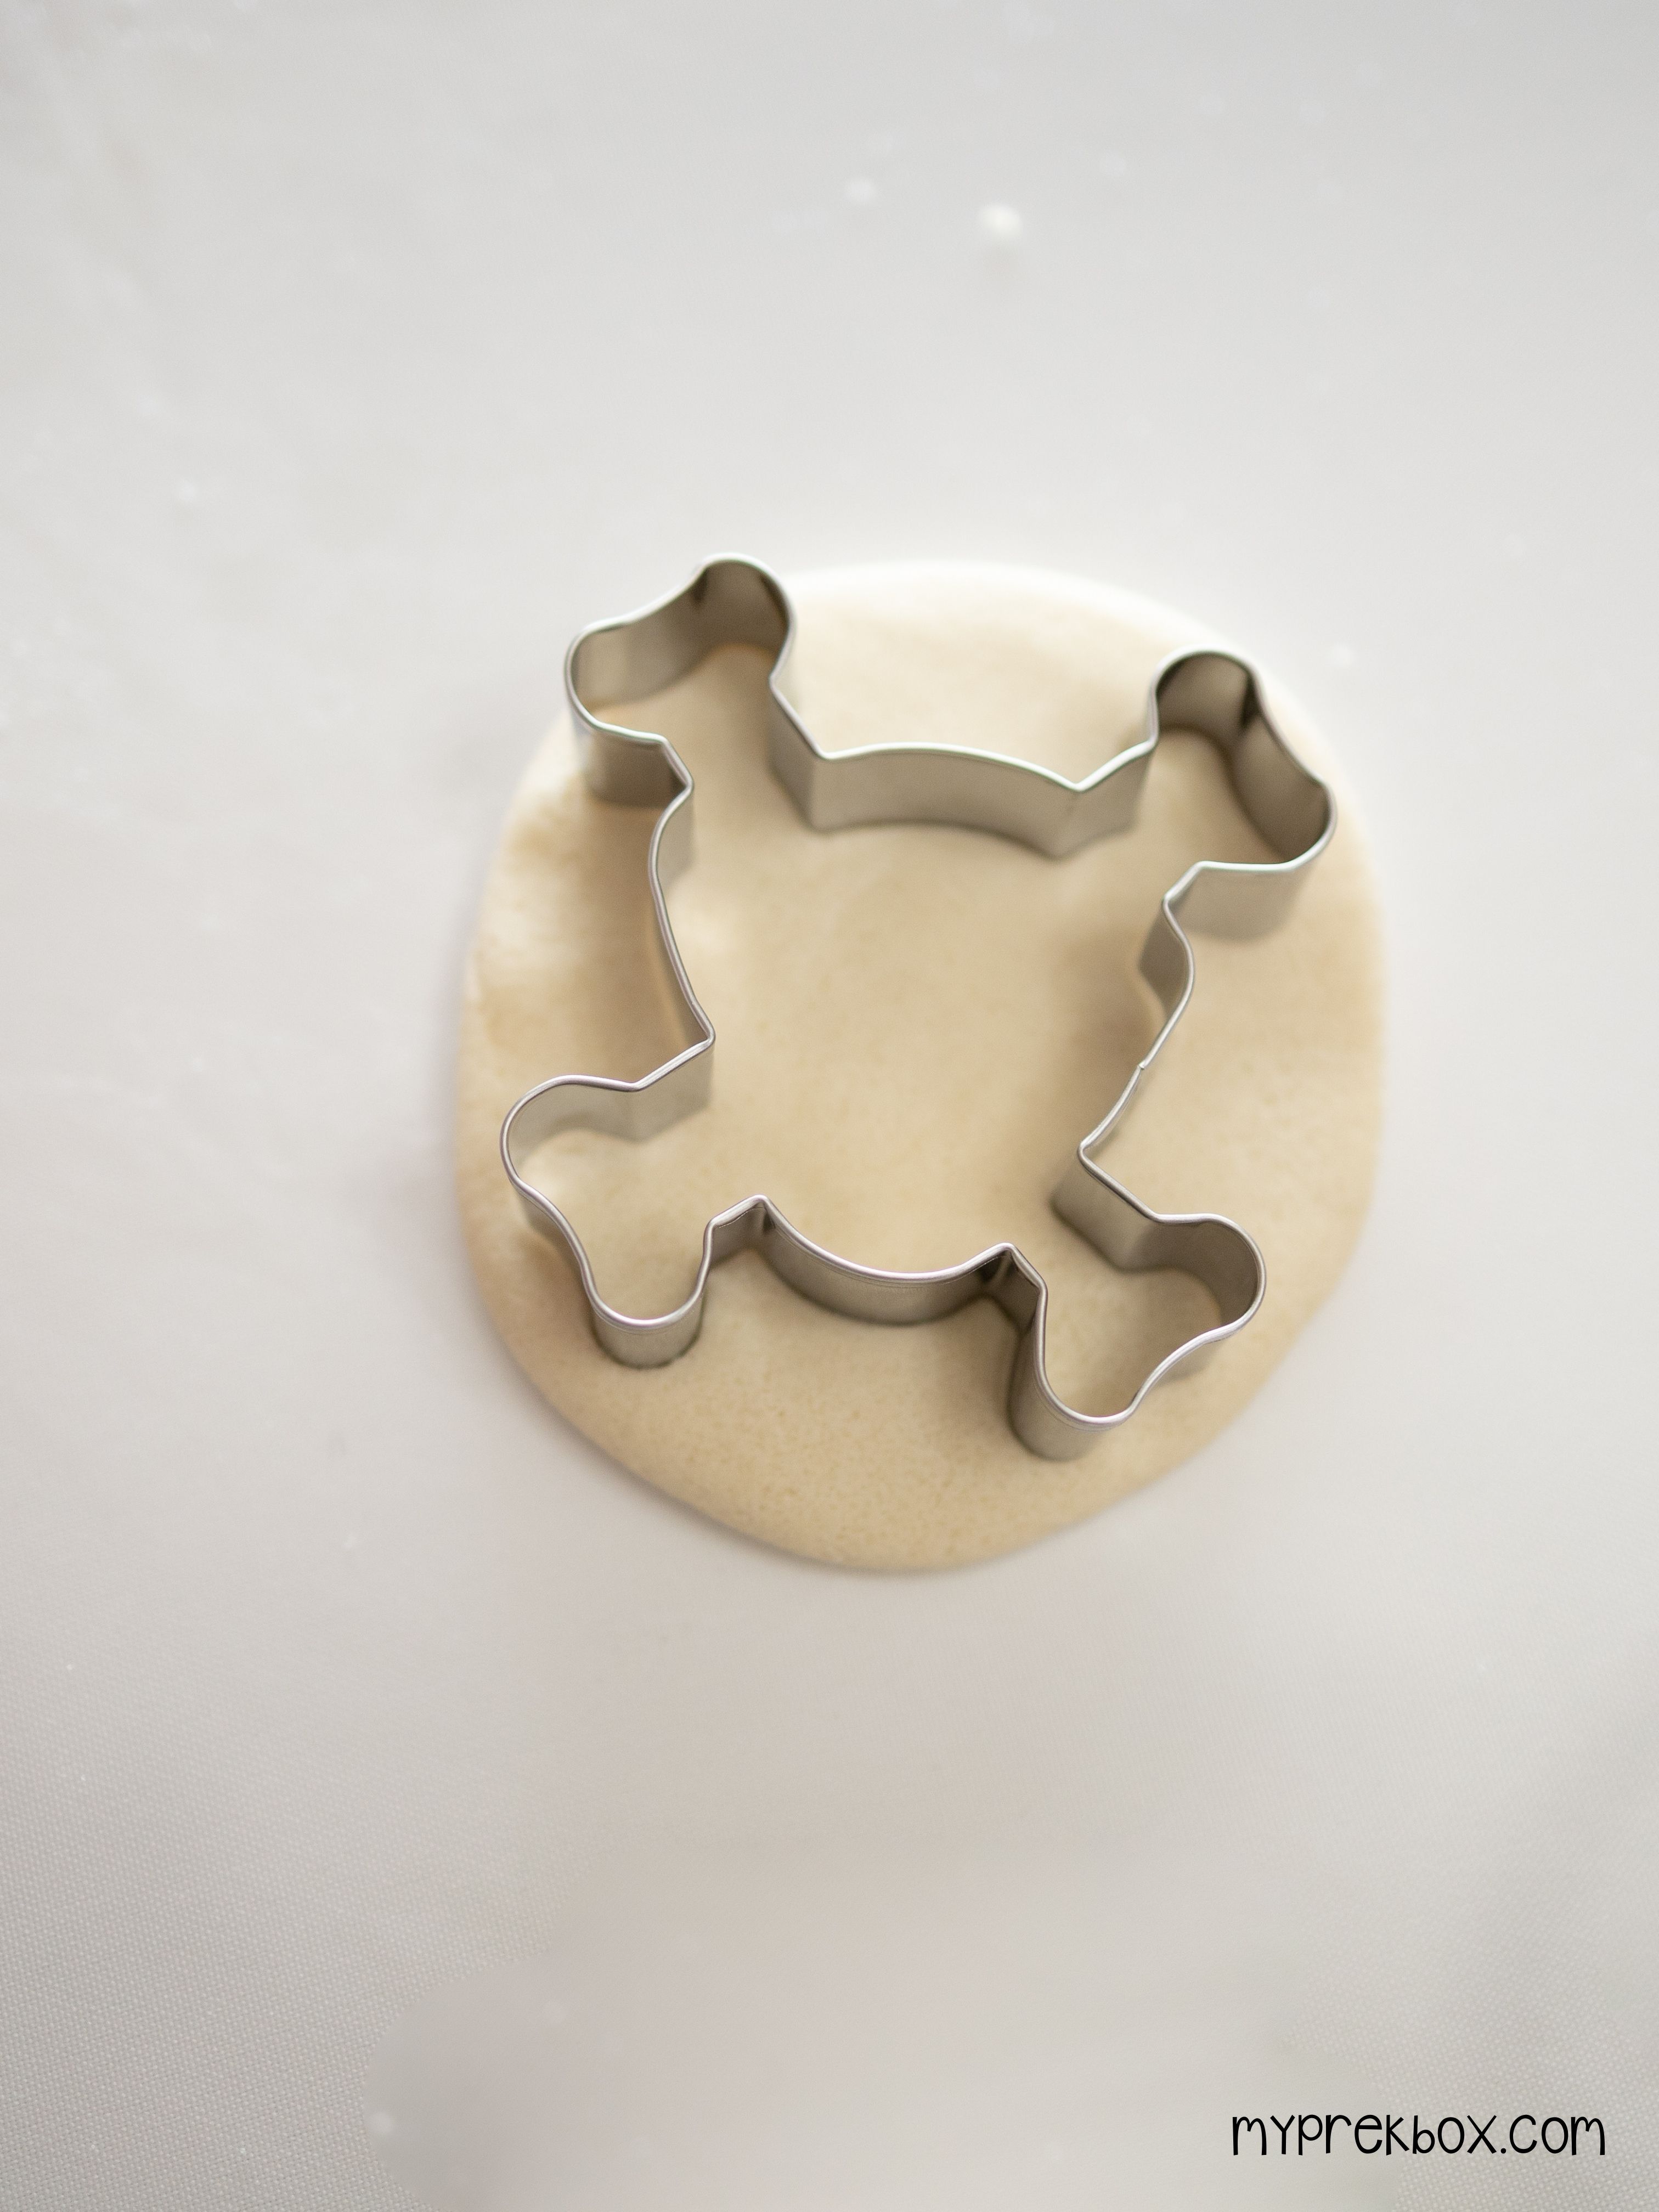 diy-pirate-doubloons-press-cookie-cutter-into-dough